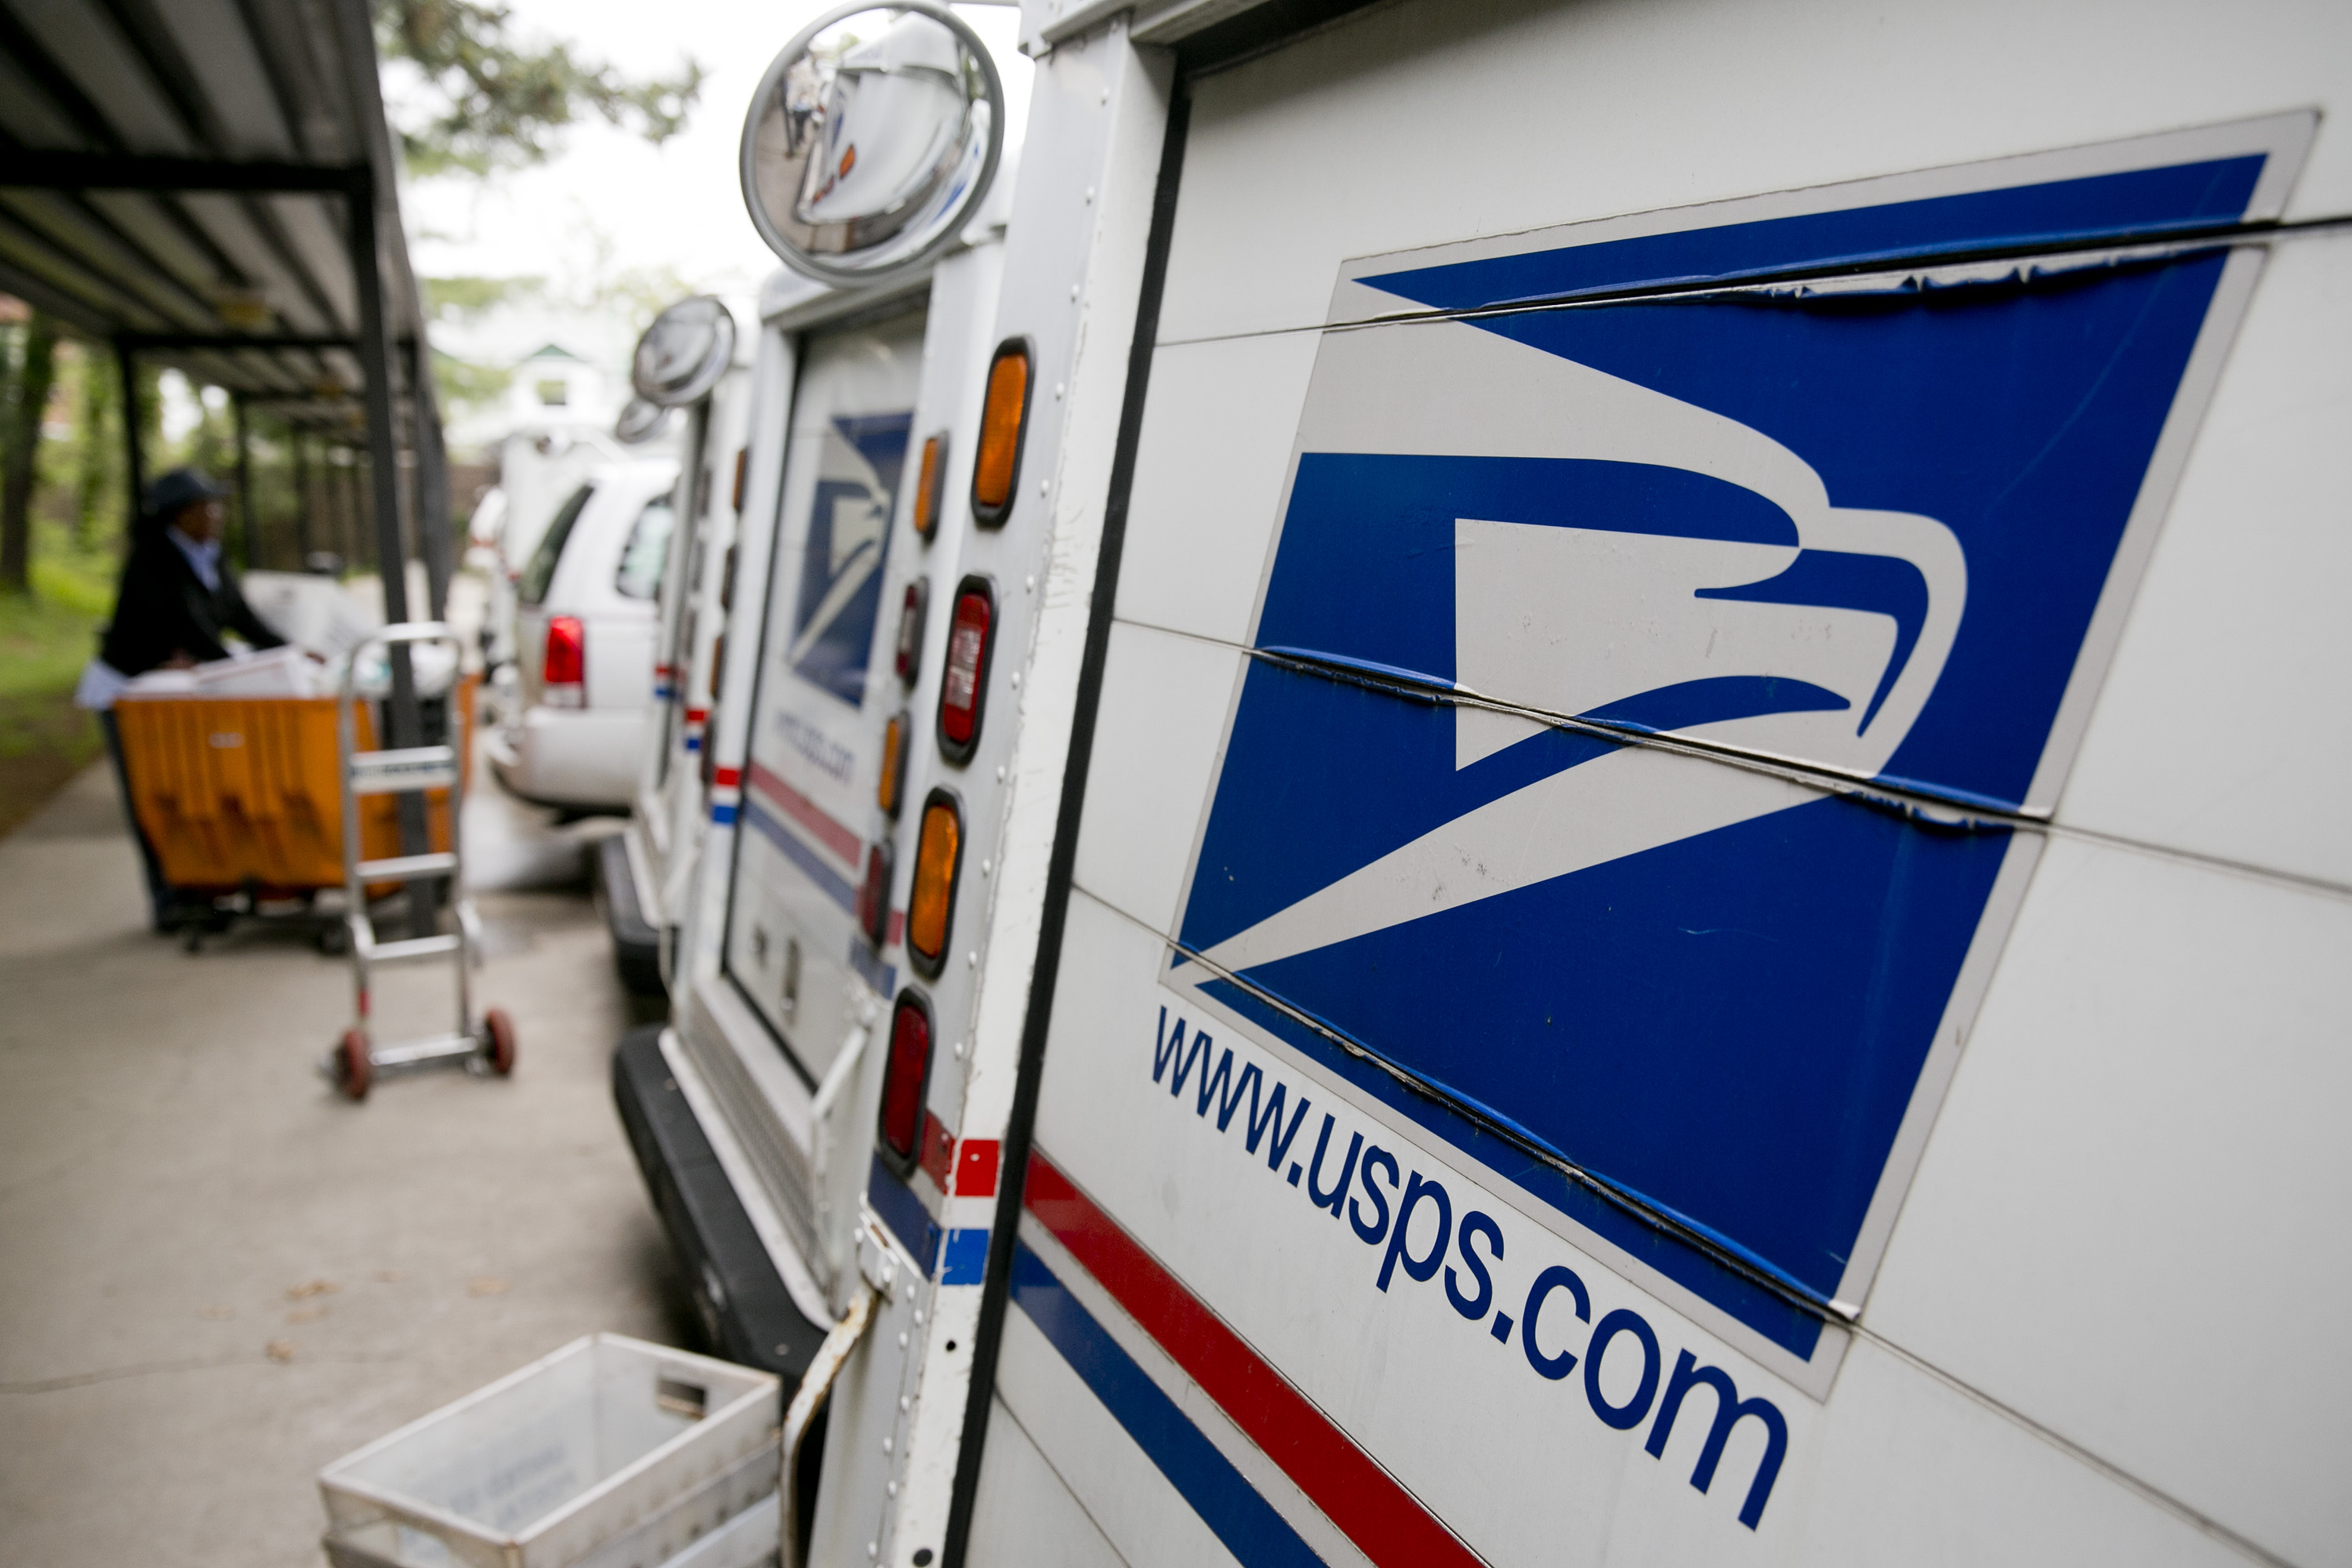 U.S. Postal Service delivery trucks sit at the Brookland Post Office in Washington, D.C. on May 9, 2013. (Bloomberg—Getty Images)